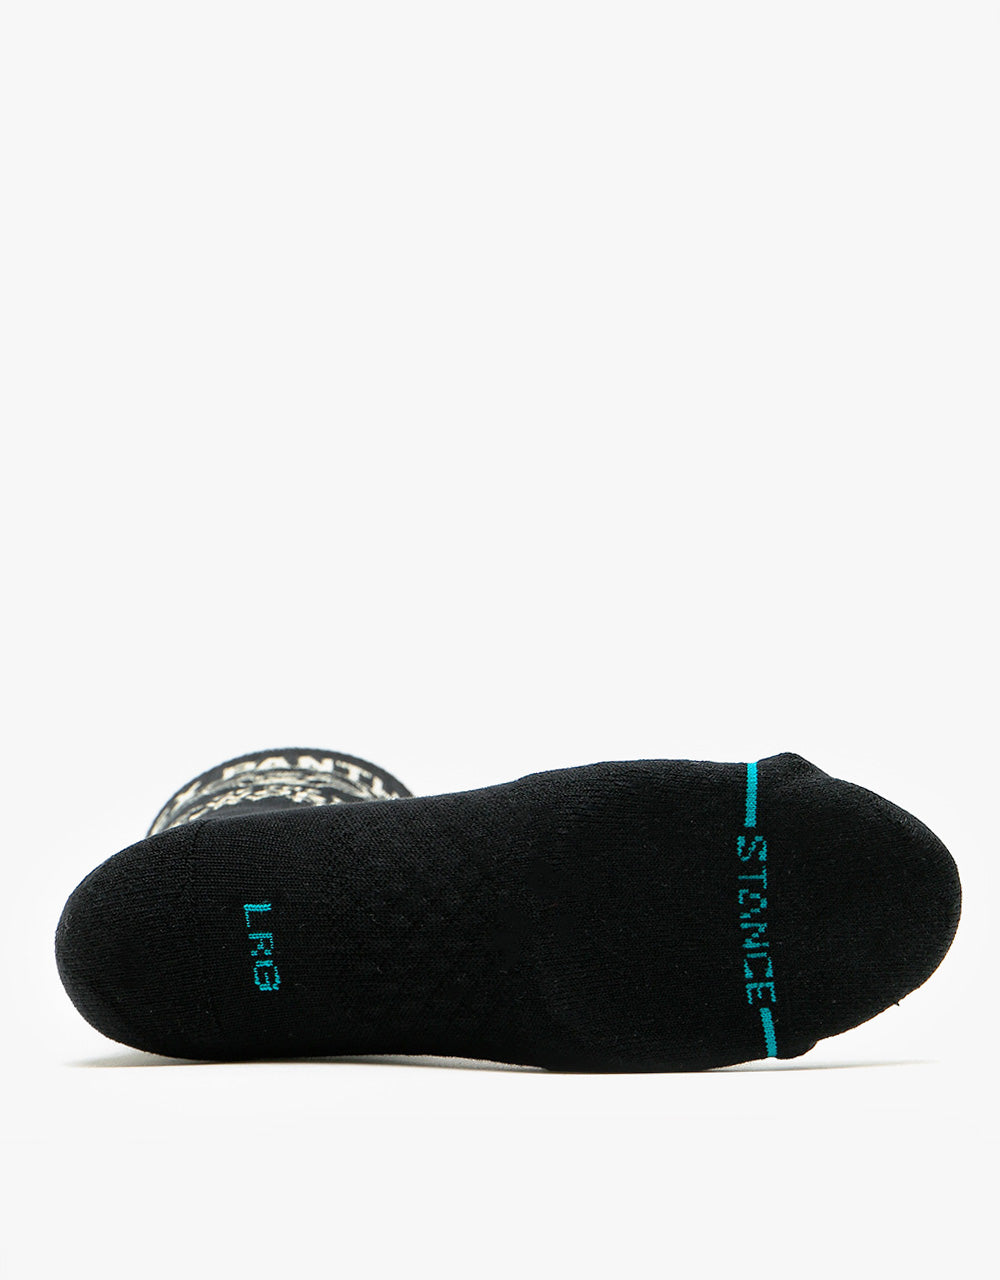 Stance x Anchorman By Odean Crew Socks - Black